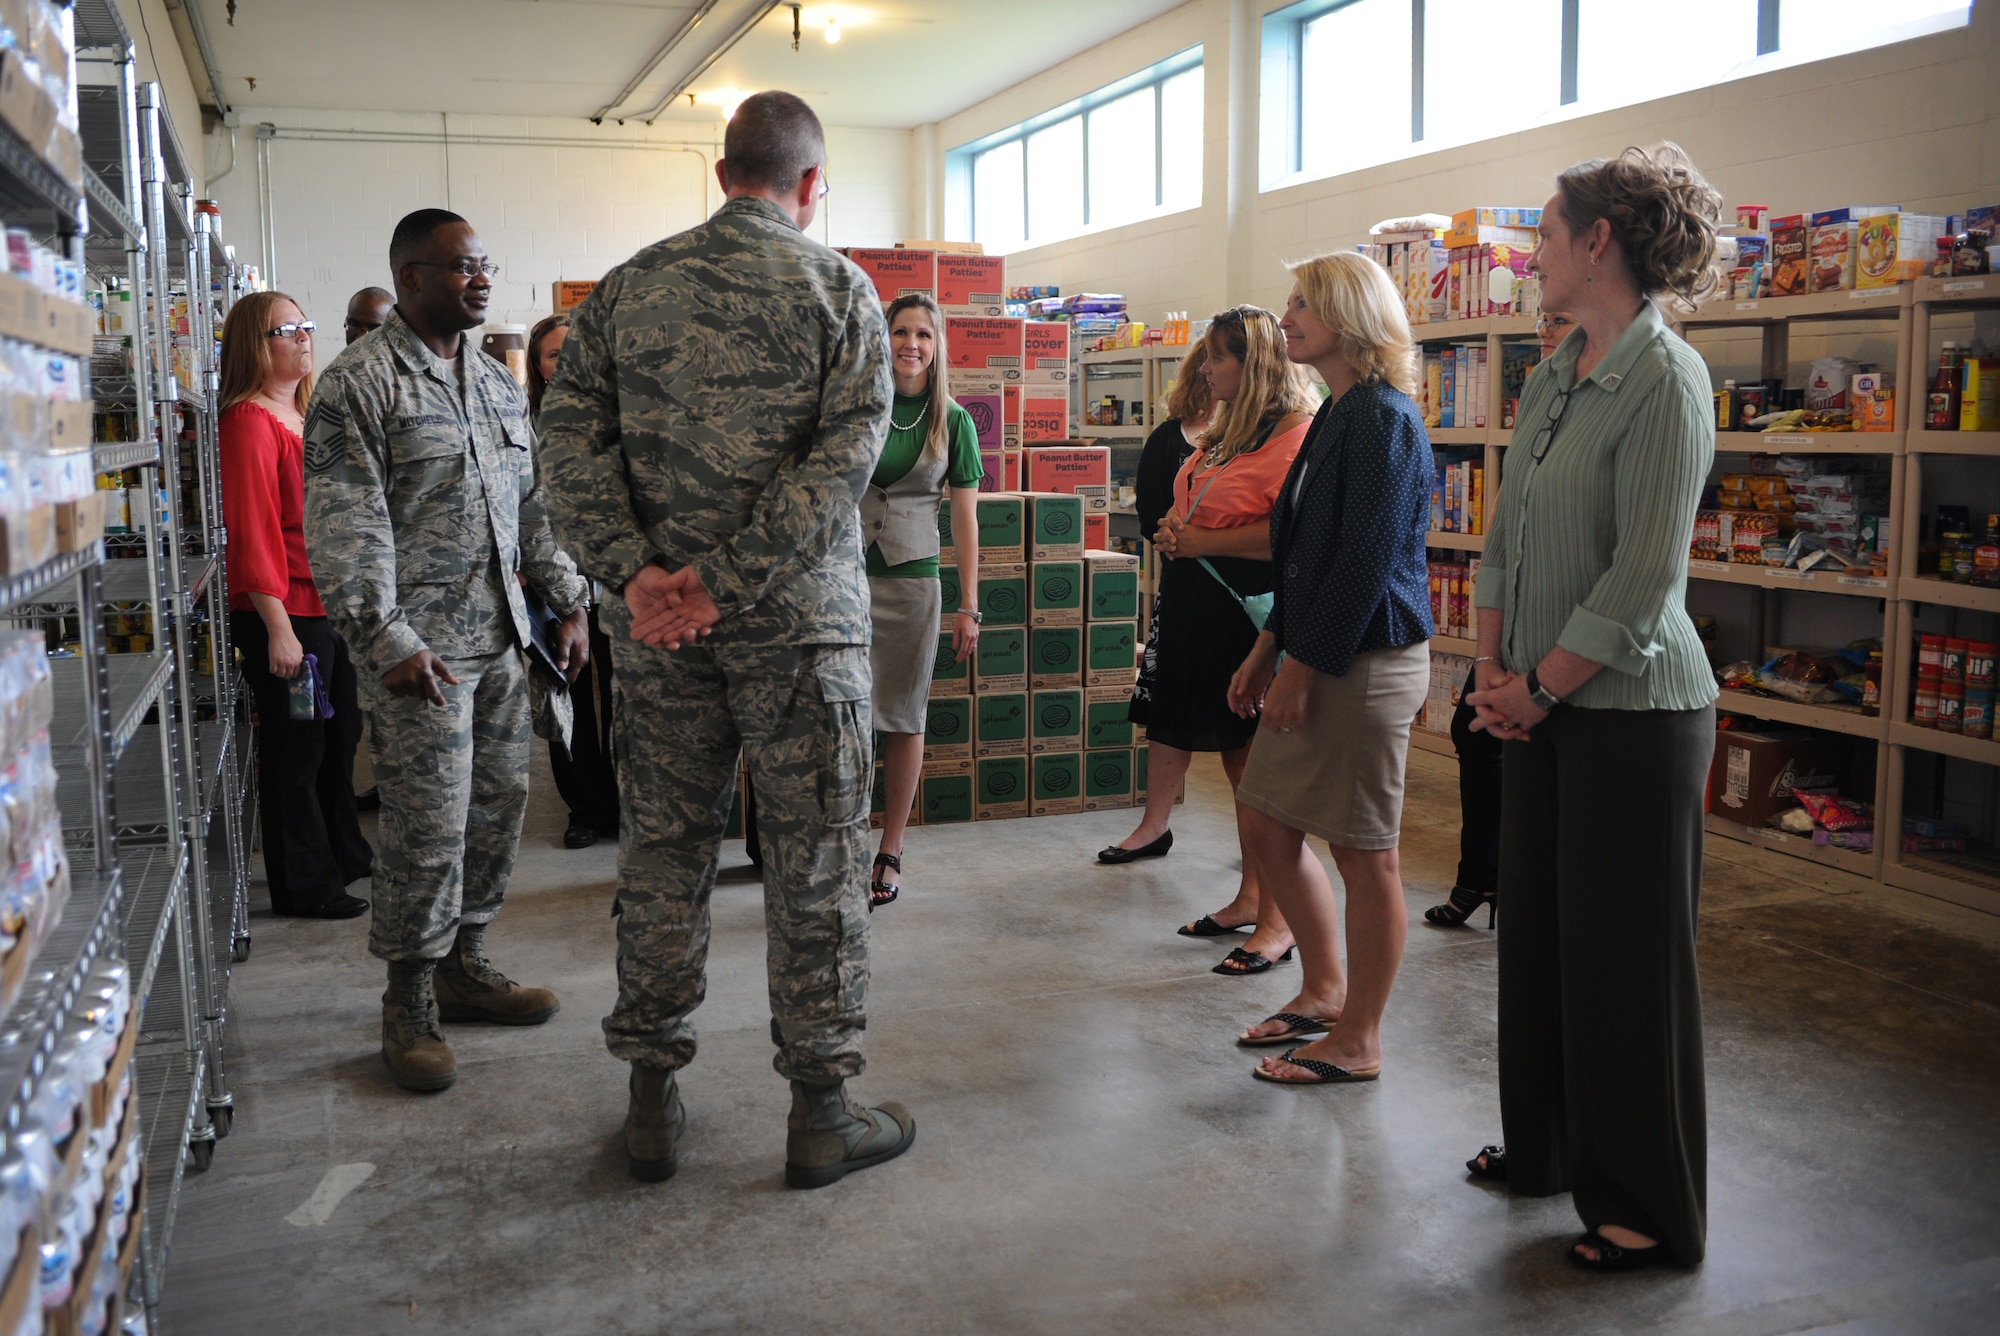 Athena Cody, spouse of Chief Master Sgt. of the Air Force James Cody, tours the first sergeants pantry at Minot Air Force Base, N.D., July 12, 2013. The first sergeants pantry is a base initiative to get food supplies to families most in need. The group sponsors a yearly turkey give away on thanks giving as well as partnering with a variety of other charitable organizations. (U.S. Air Force photo/ Airman 1st Class Stephanie Ashley)